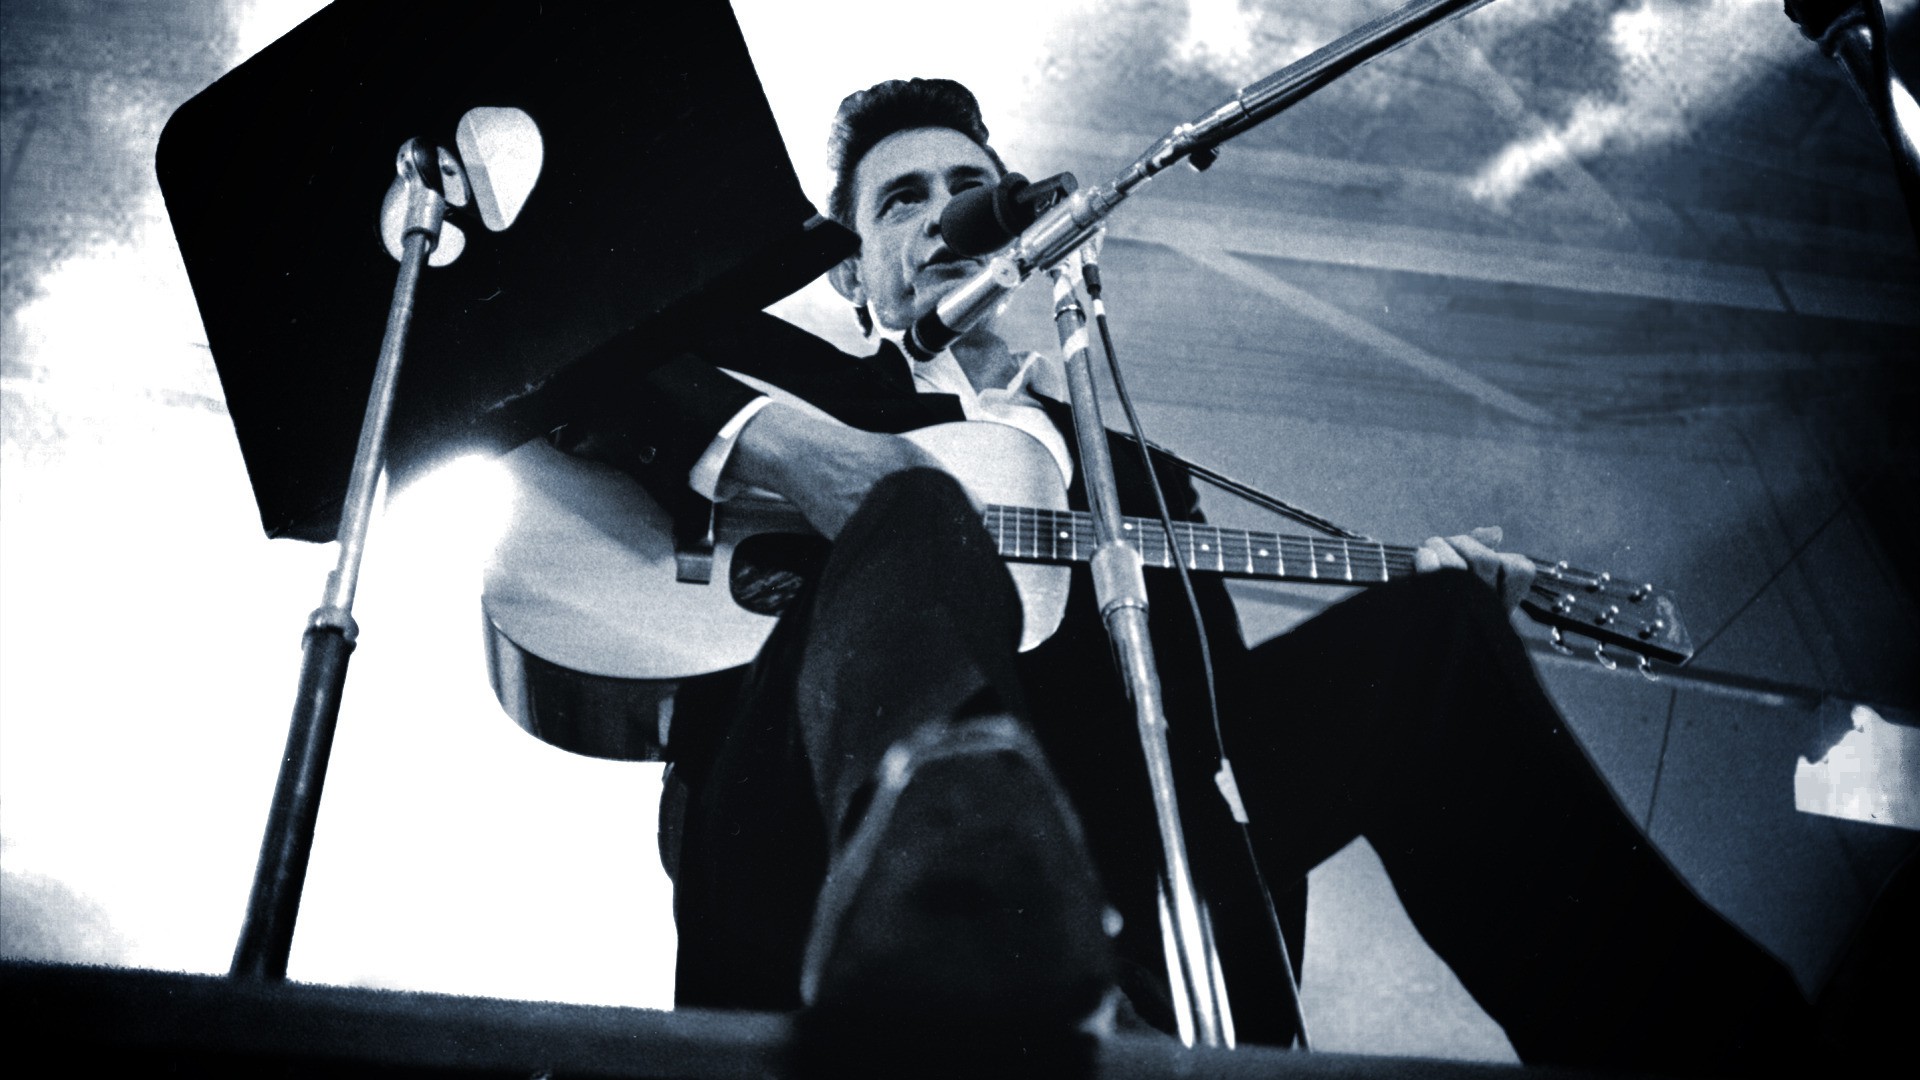 johnny cash country music free awesome image for mobile